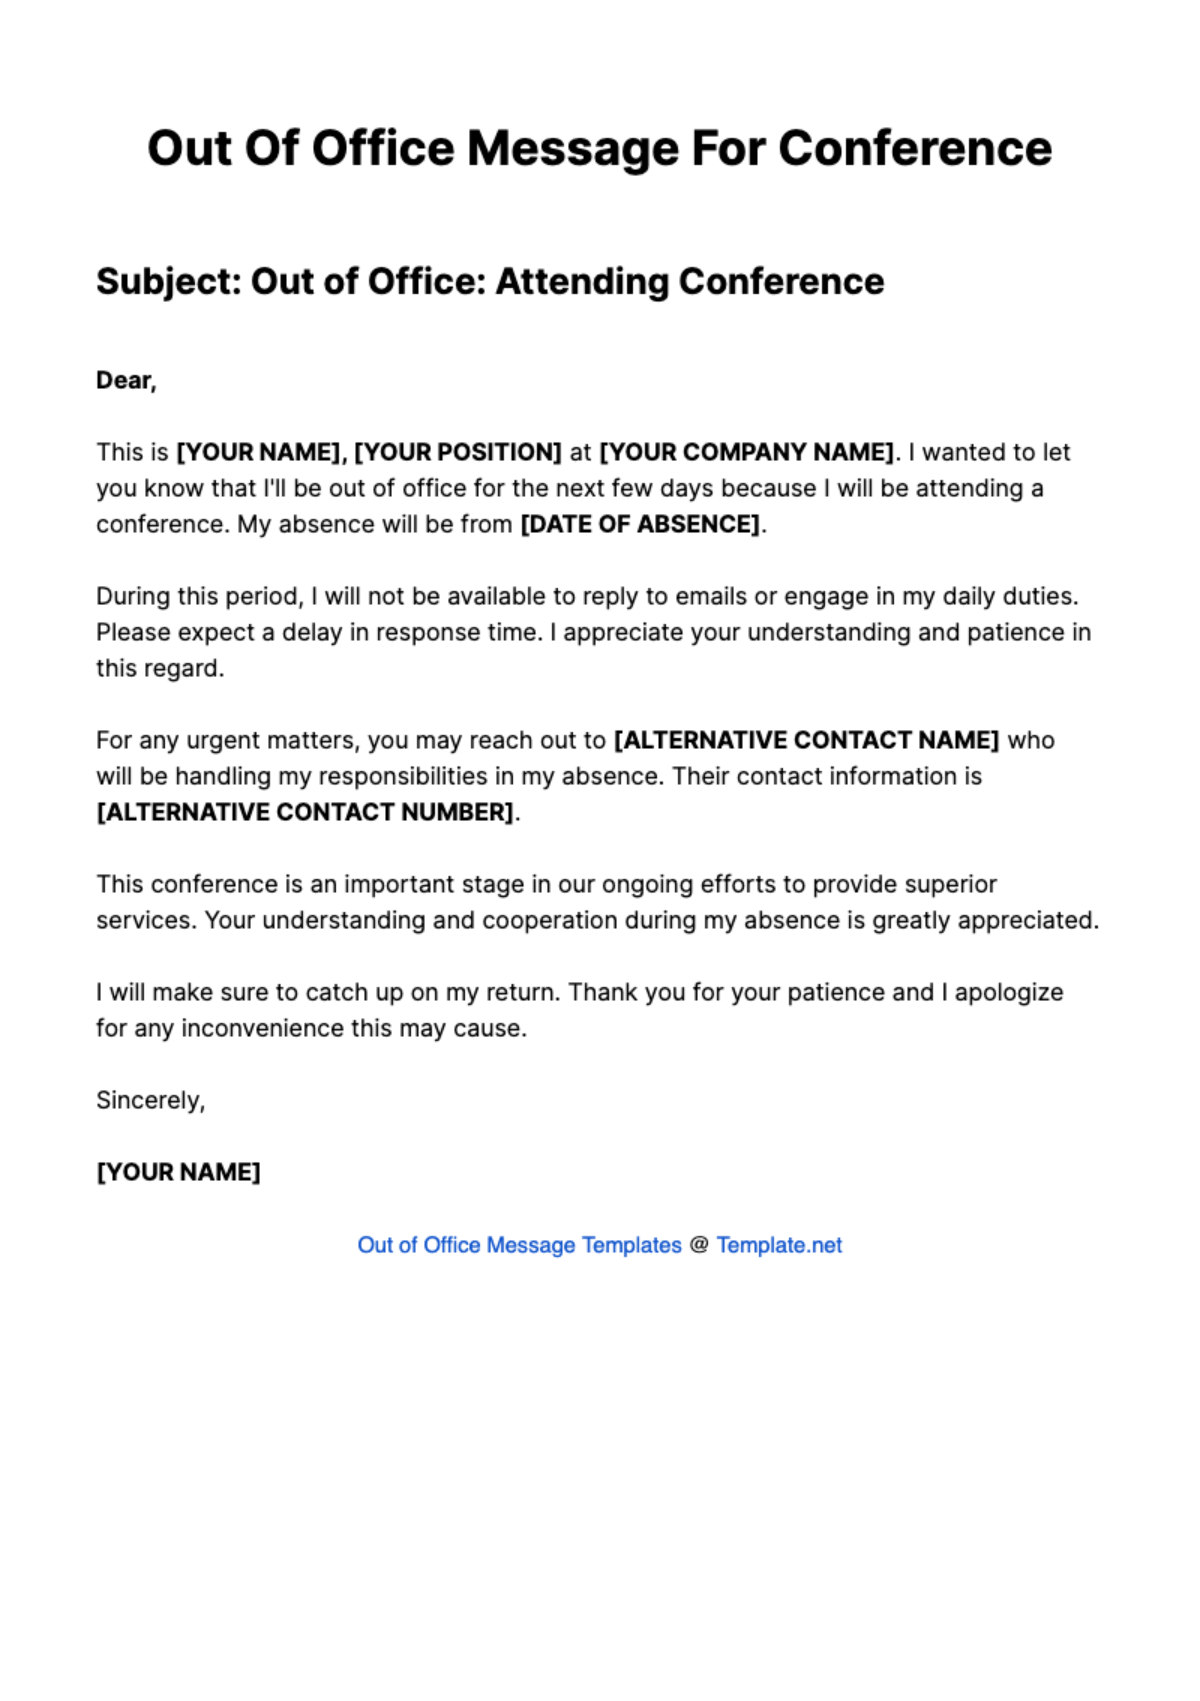 Out Of Office Message For Conference Template